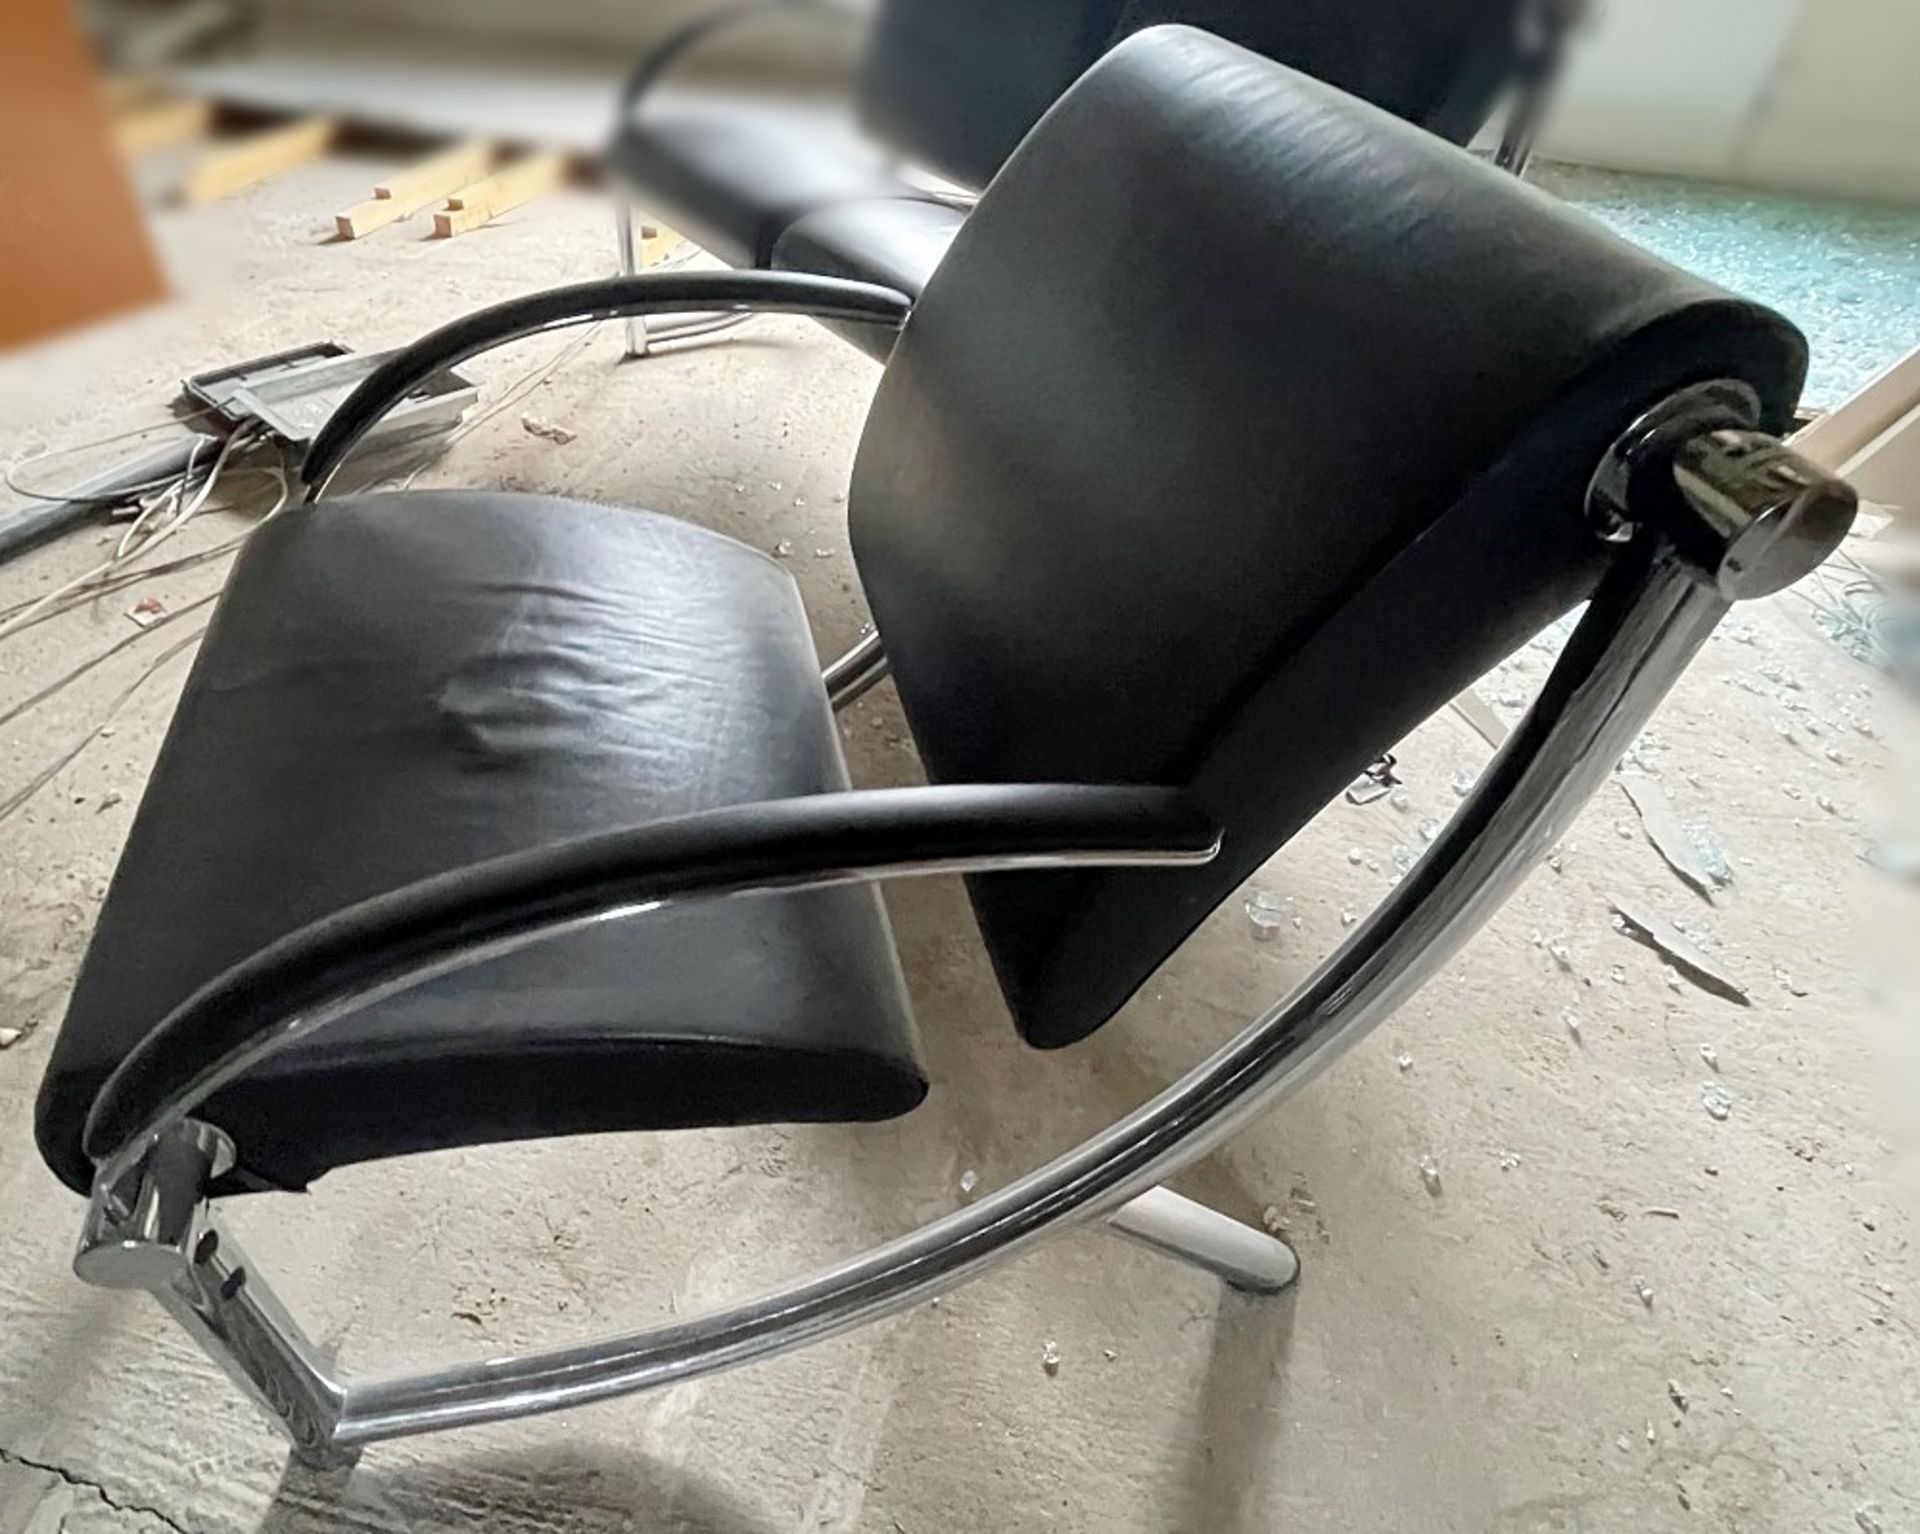 A Pair Of KLOBER Executive Meeting Chair With Arms In Black Leather & Chrome - Dimensions: H76 x - Image 4 of 6